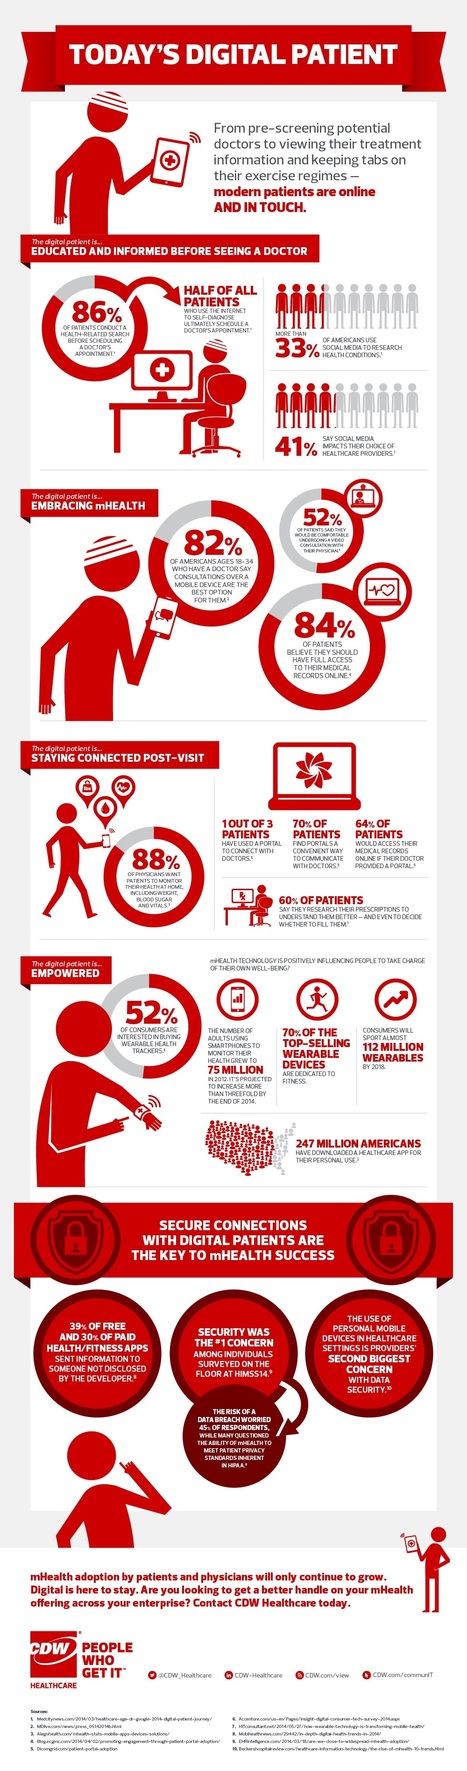 Infographic: Today's Digital Patient | Pharma: Trends and Uses Of Mobile Apps and Digital Marketing | Scoop.it